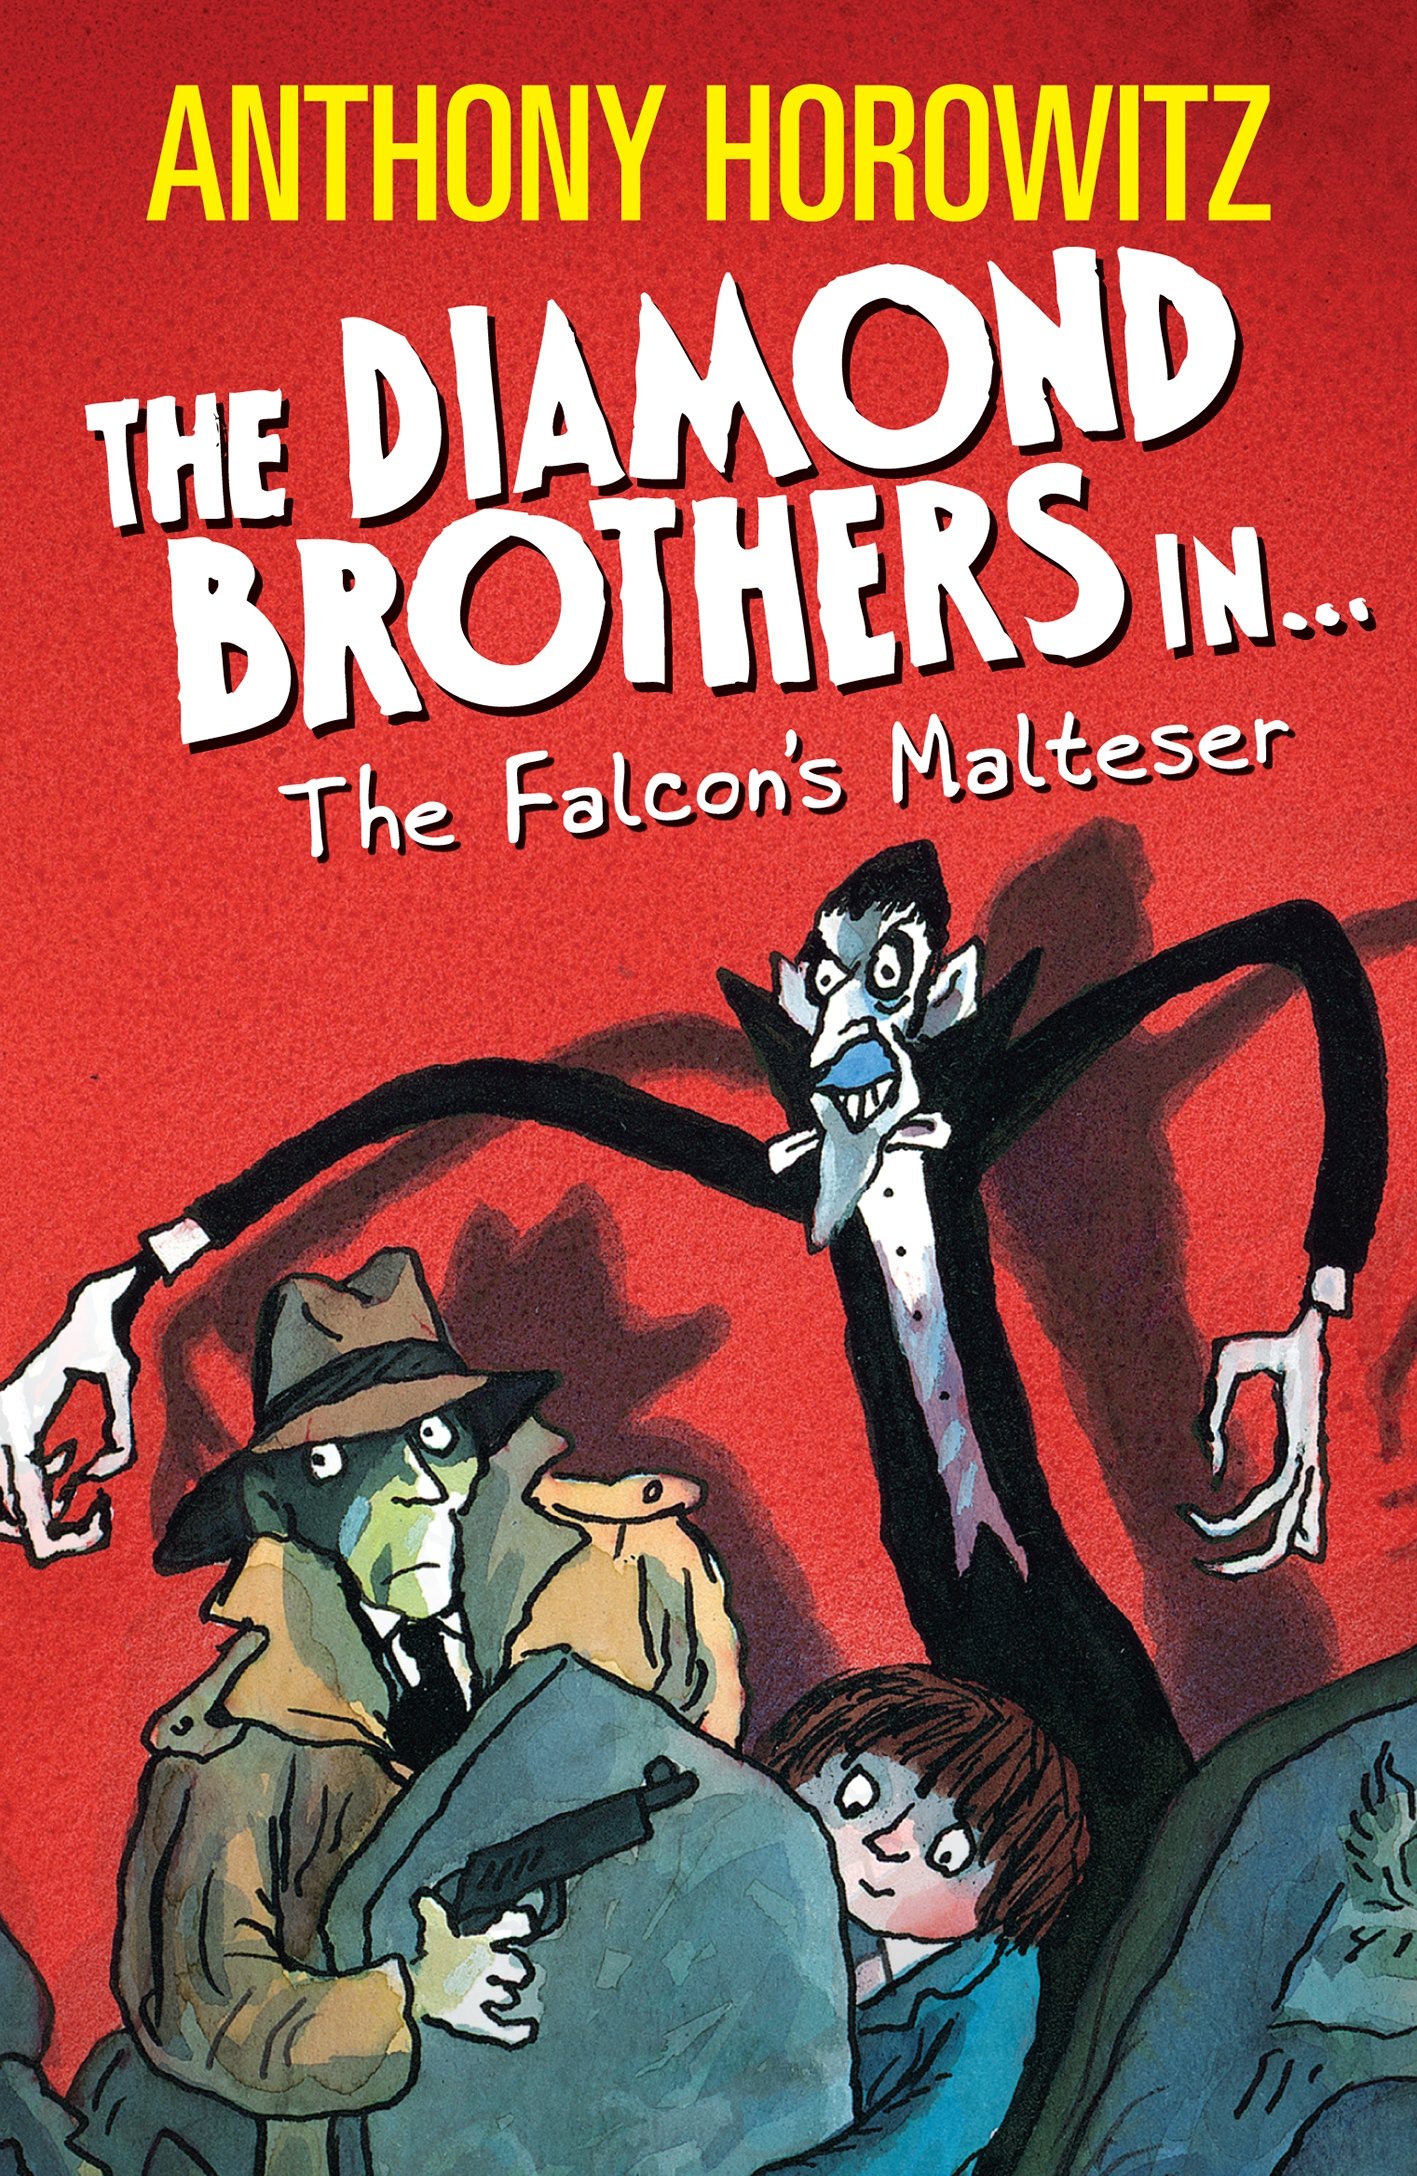 The Diamond Brothers series by Anthony Horowitz 